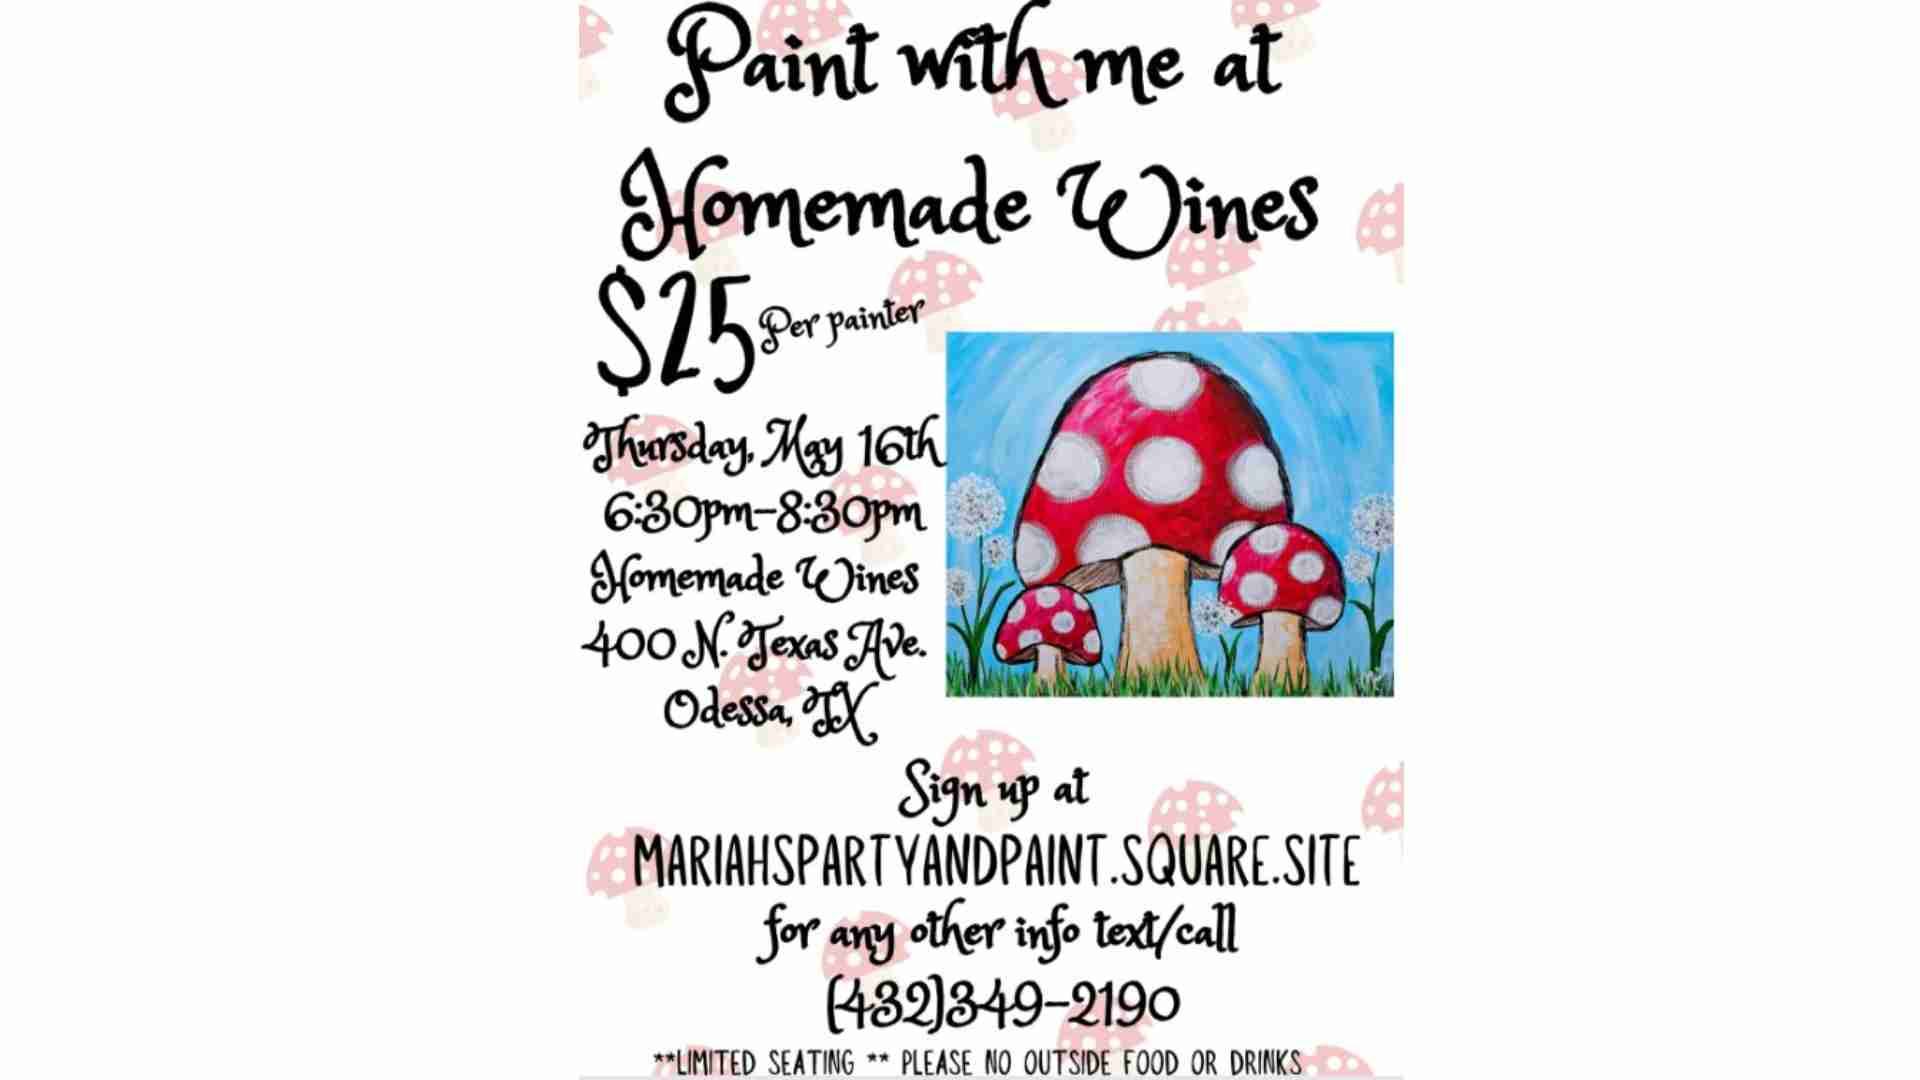 Paint with me at Homemade Wines